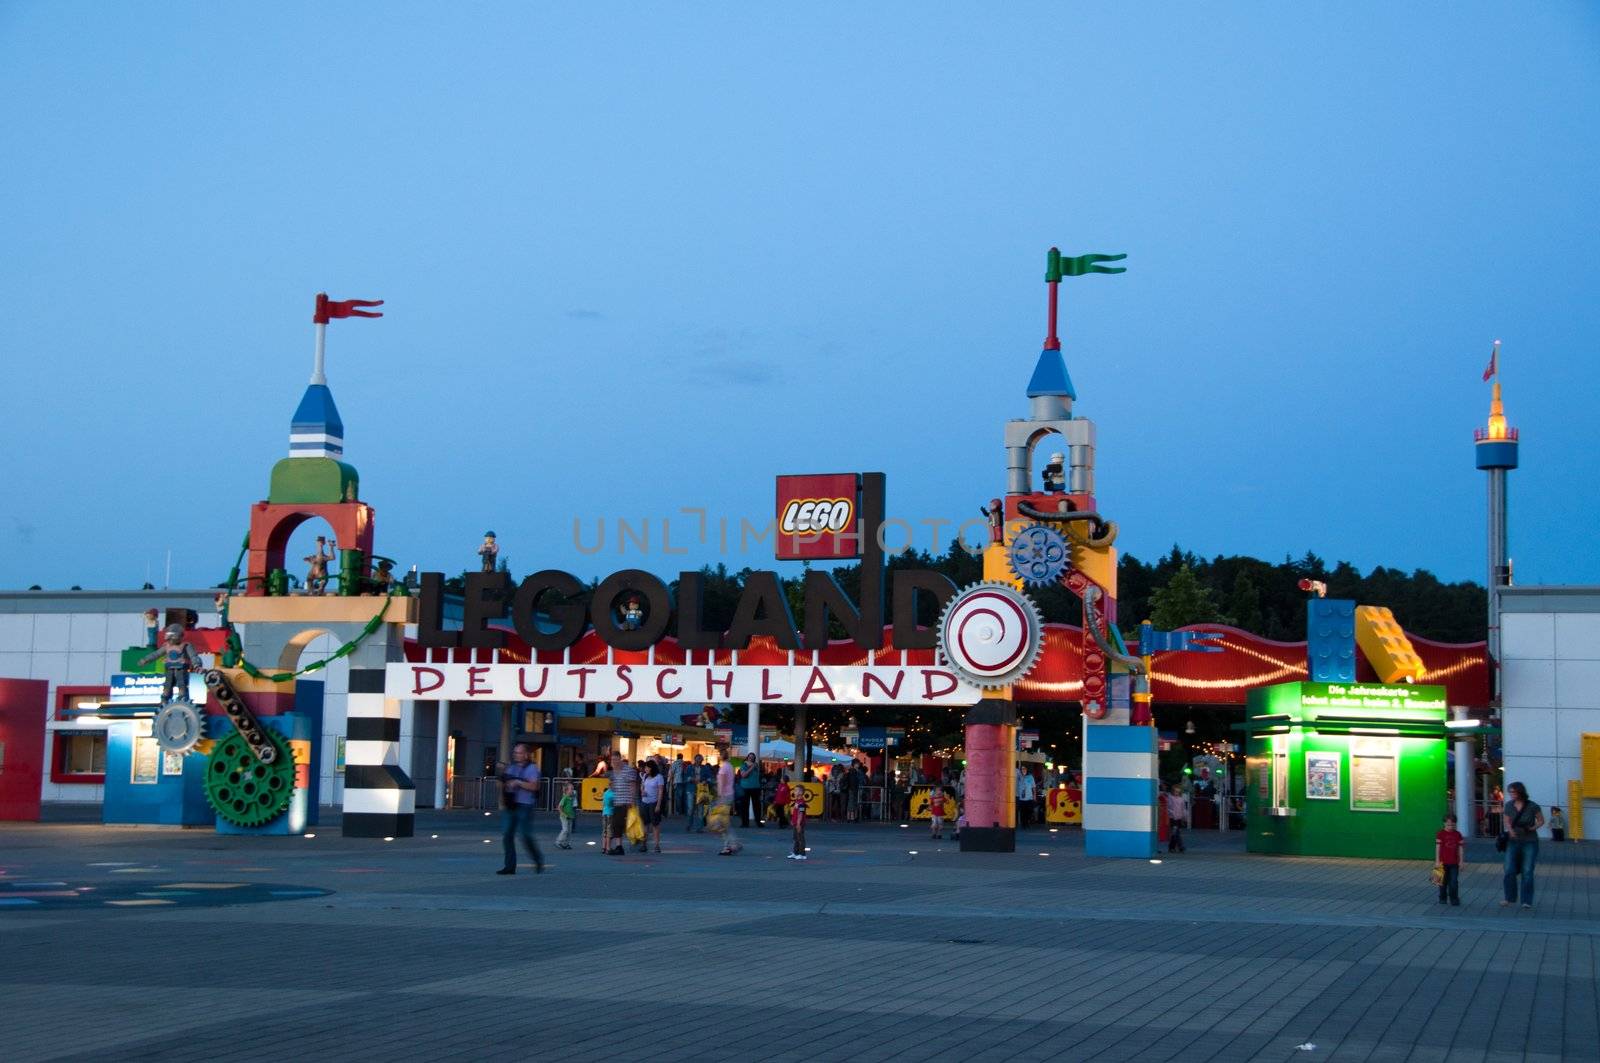 Entrance of Legoland Germany in the evening by franky242